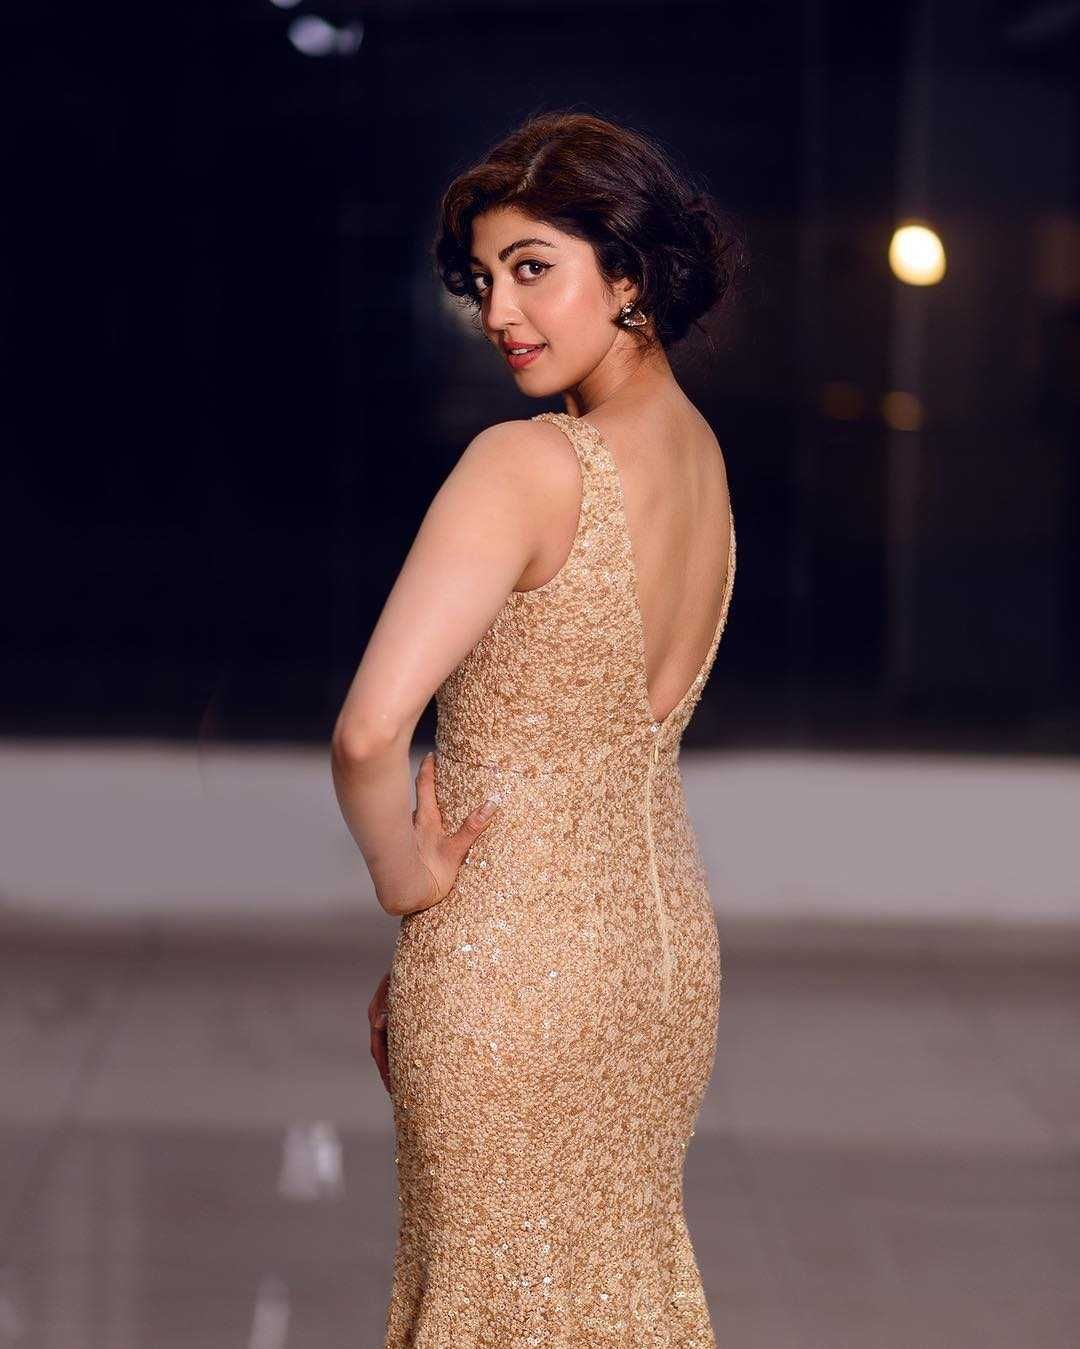 Pranitha Latest Hot Spicy Gallery